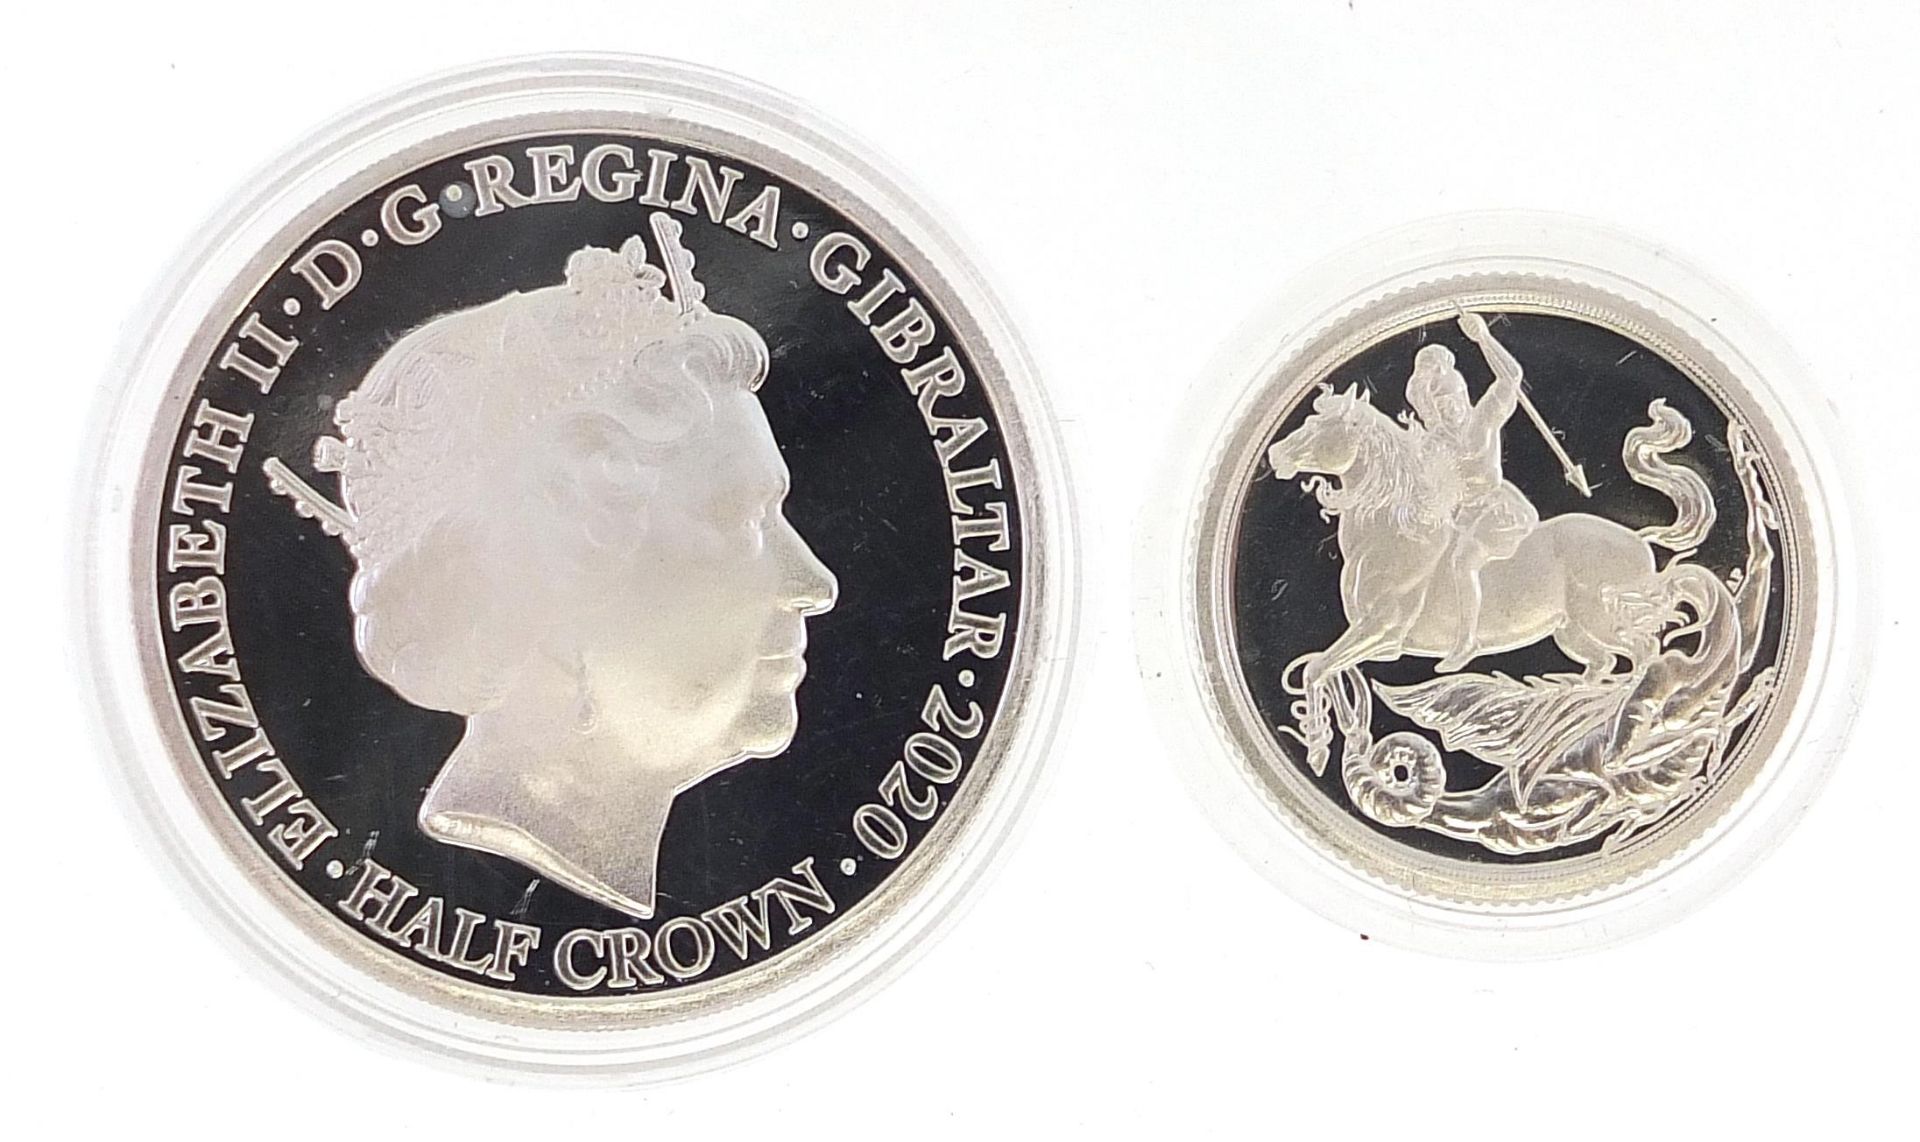 Elizabeth II 2019 silver sovereign and a silver proof half crown commemorating Sir Winston Churchill - Image 3 of 3